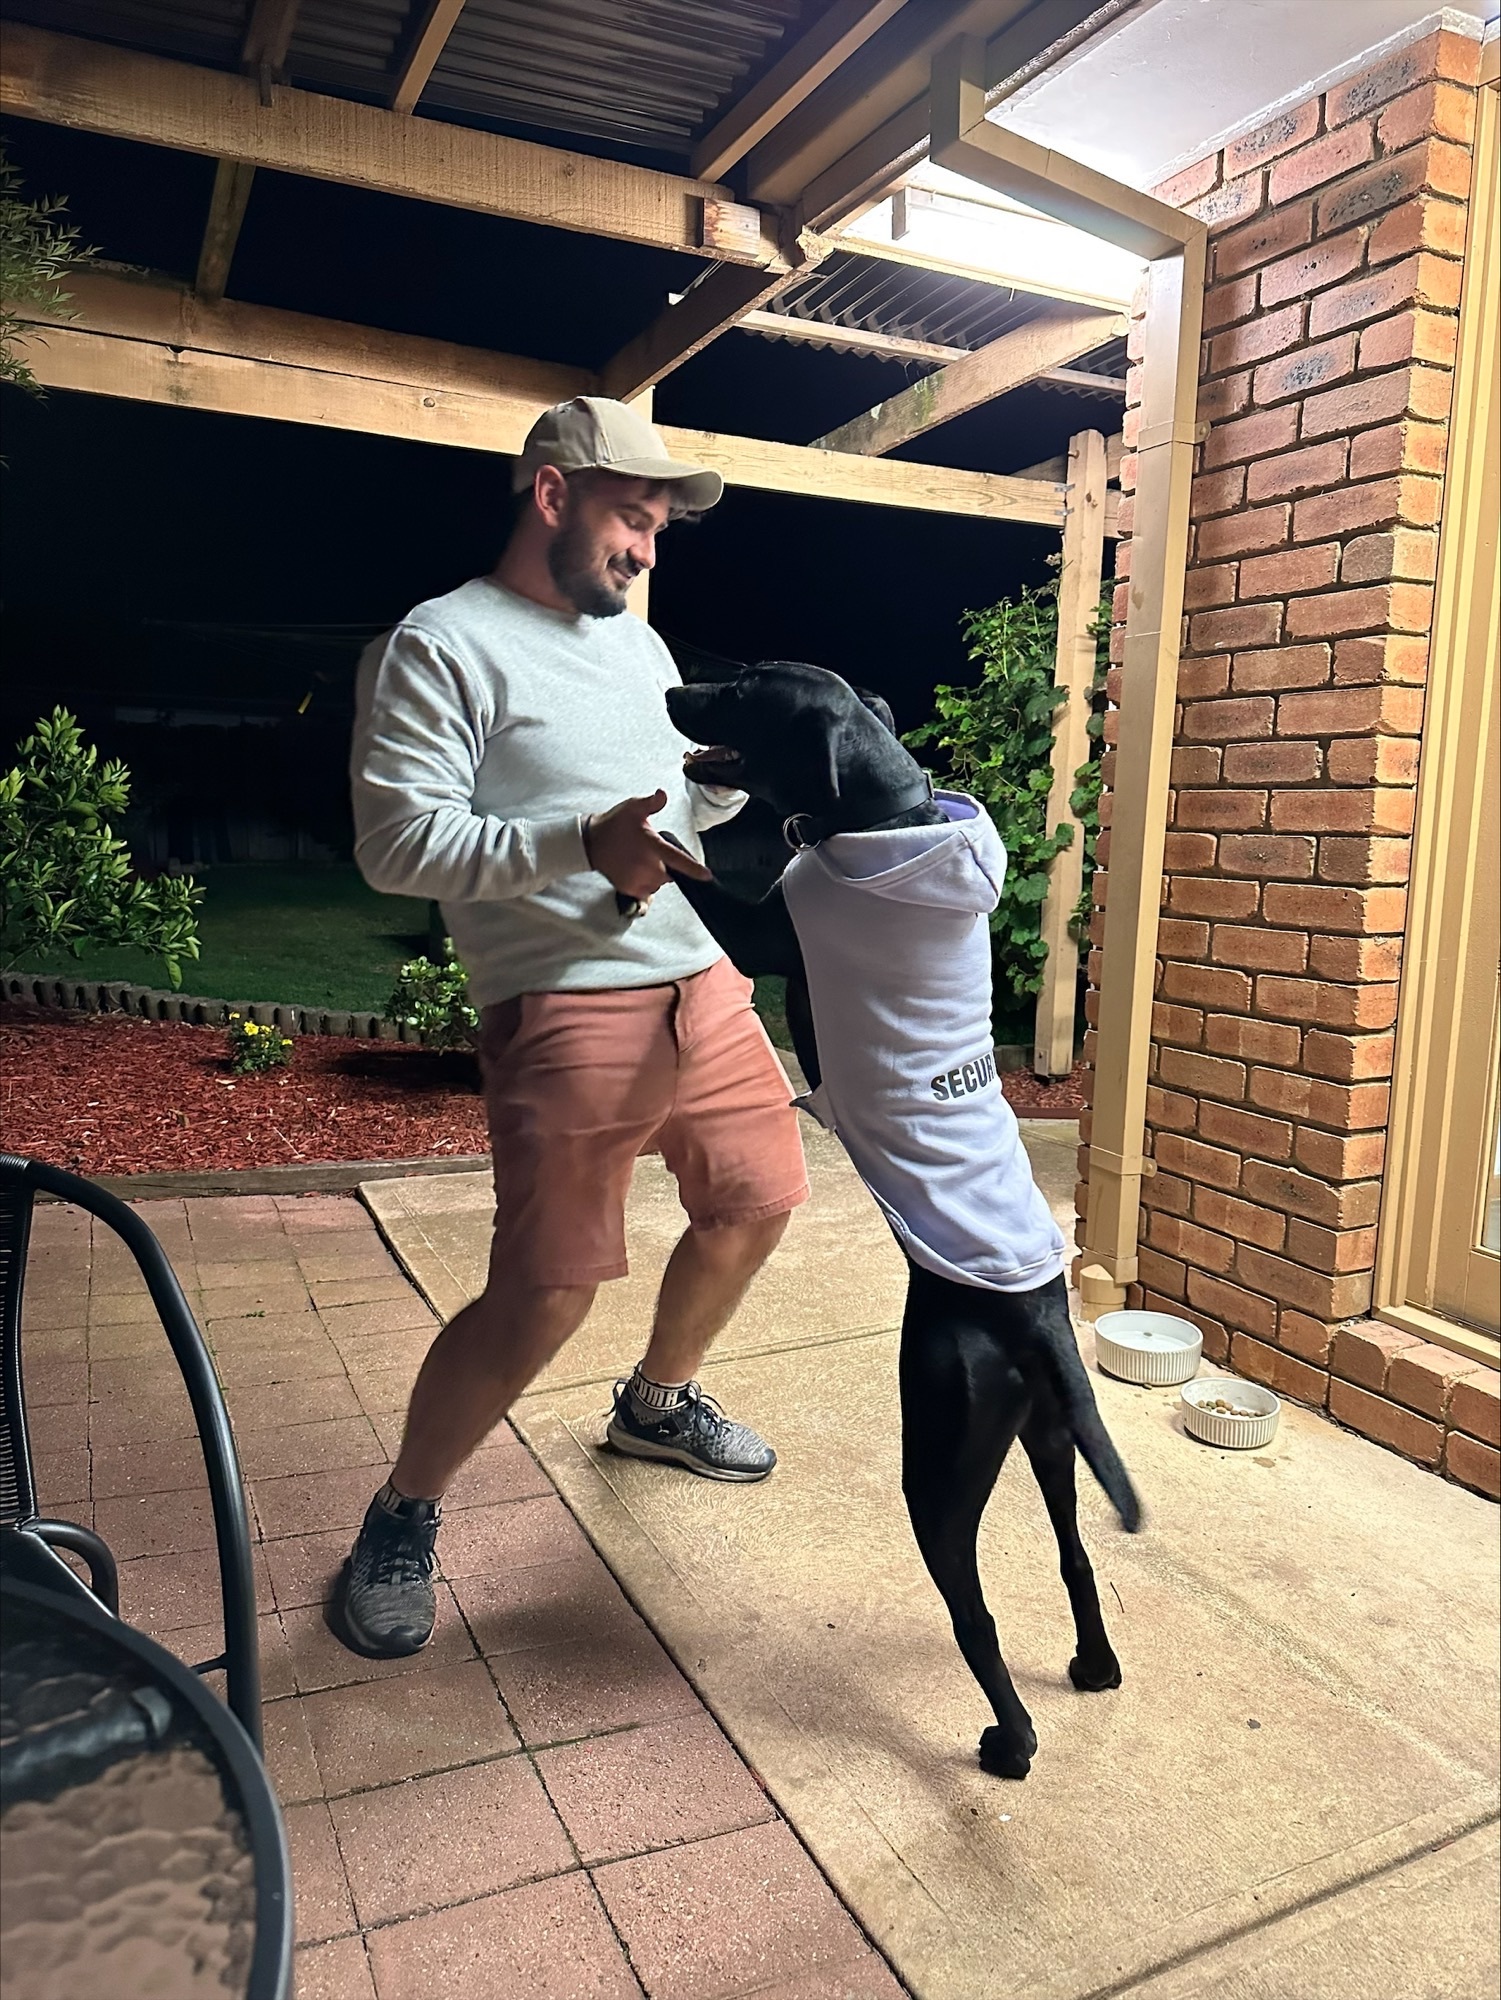 A big black dog plays with his human